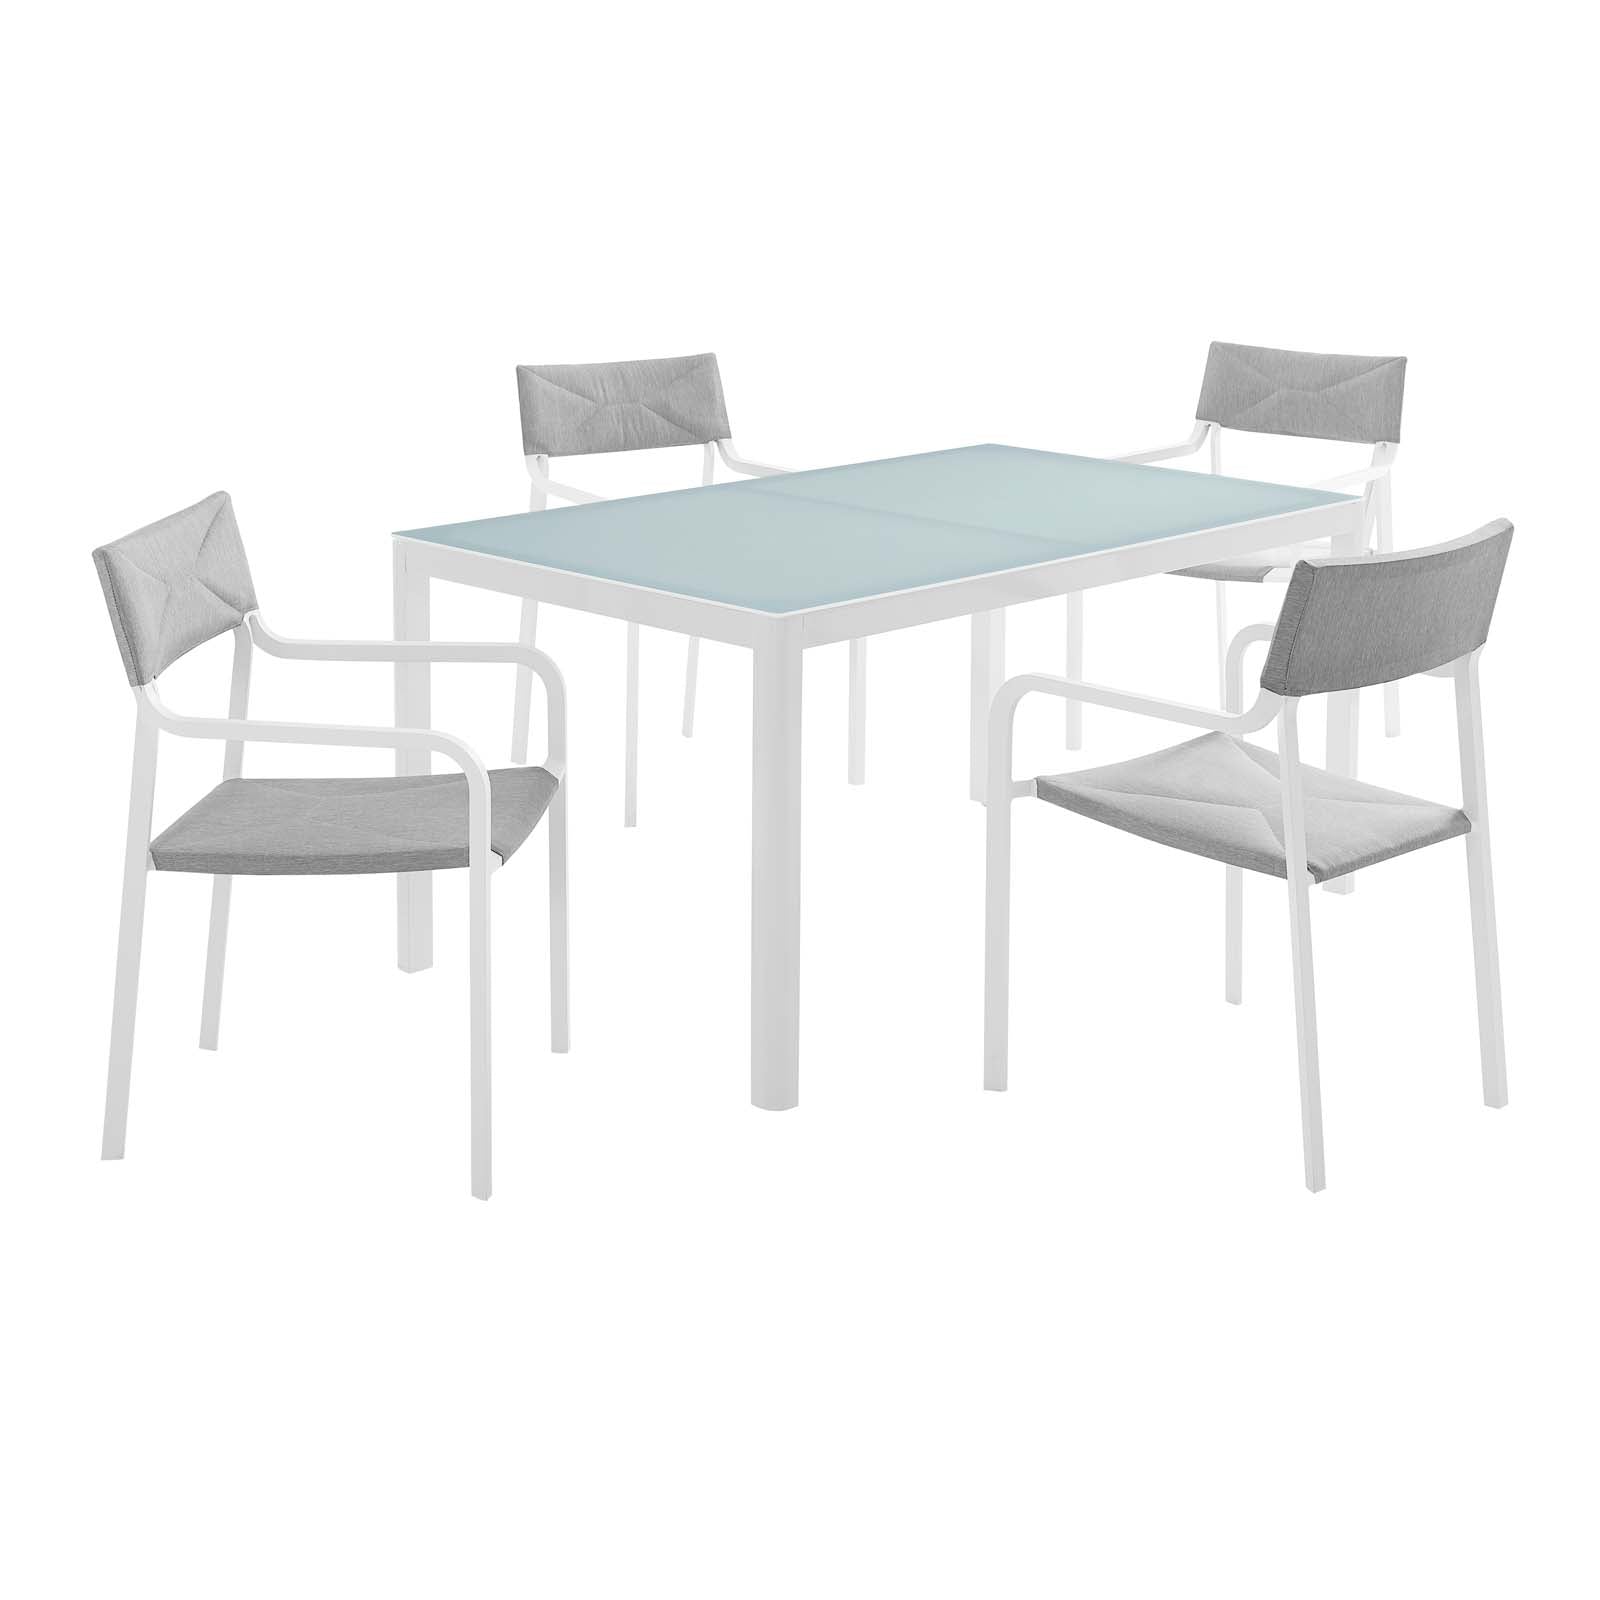 Modway Outdoor Dining Sets - Raleigh 5 Piece Outdoor Patio Aluminum Dining Set White Gray